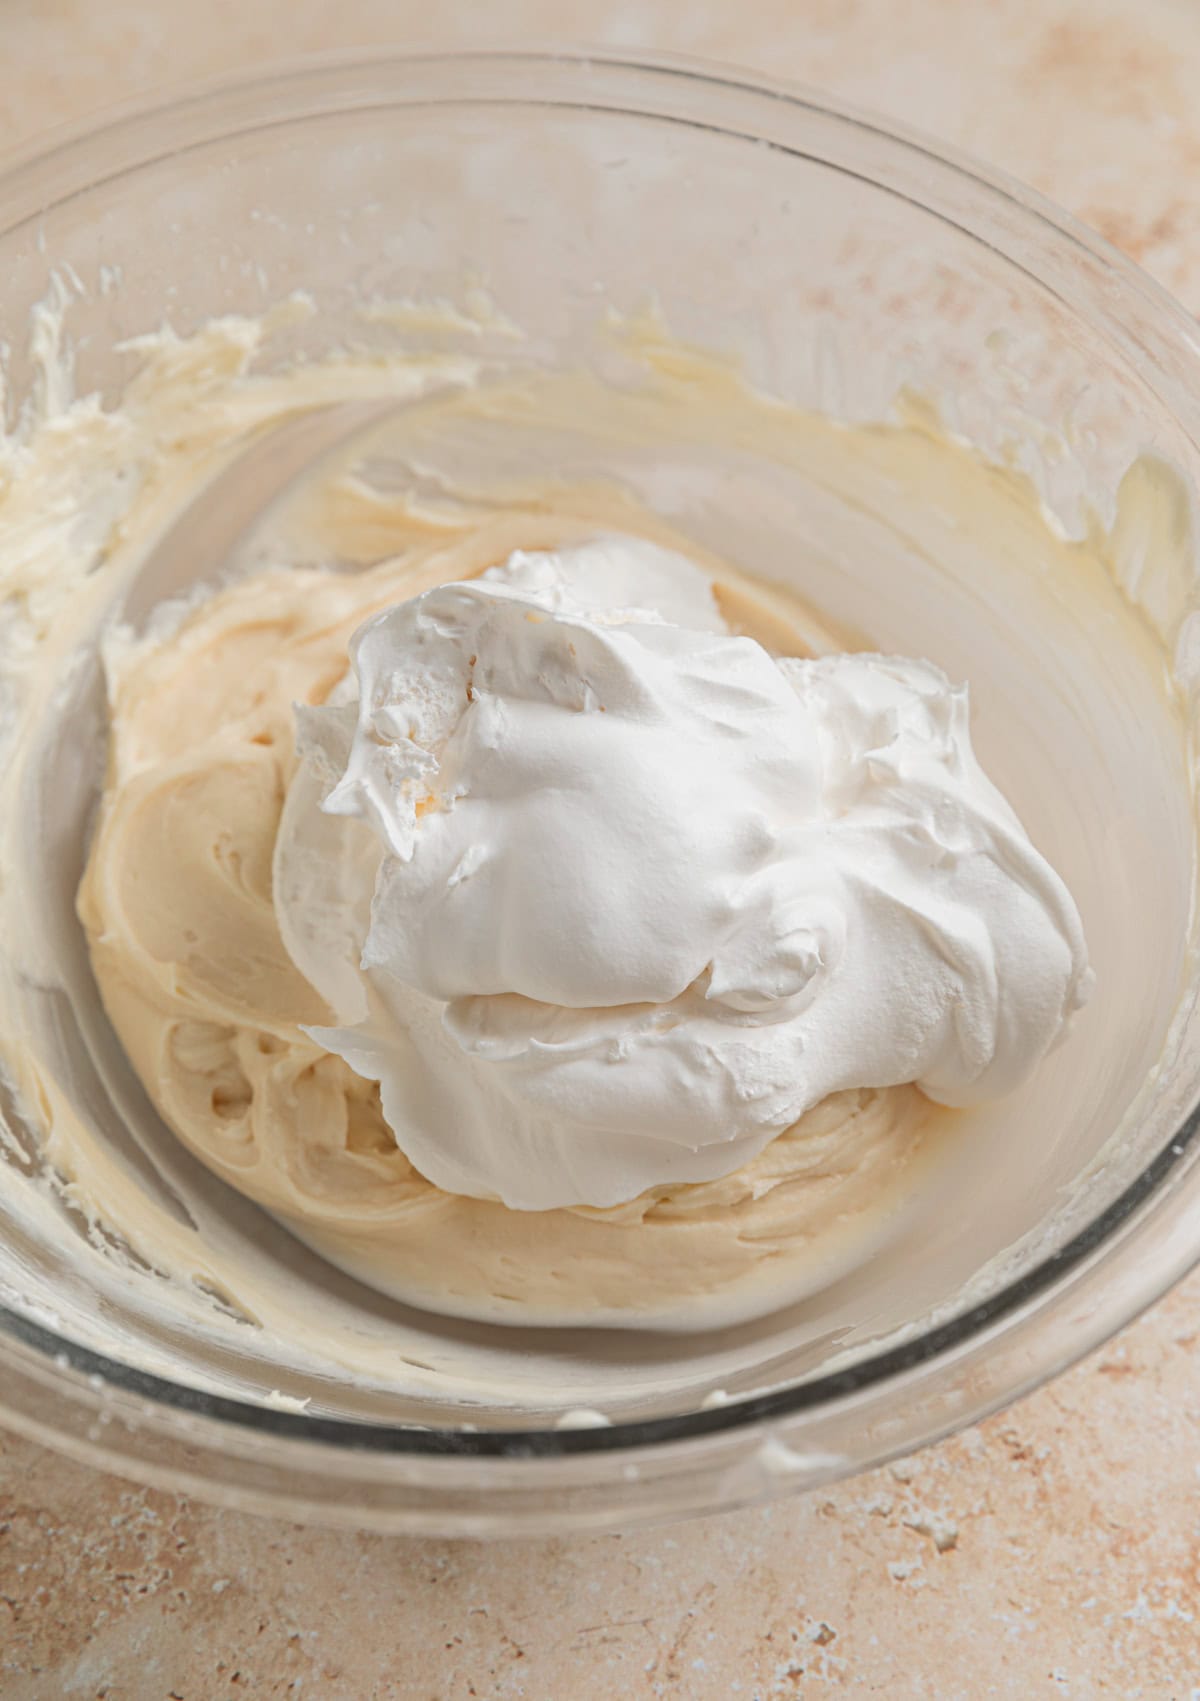 Cool whip added to cream cheese mixture in bowl.